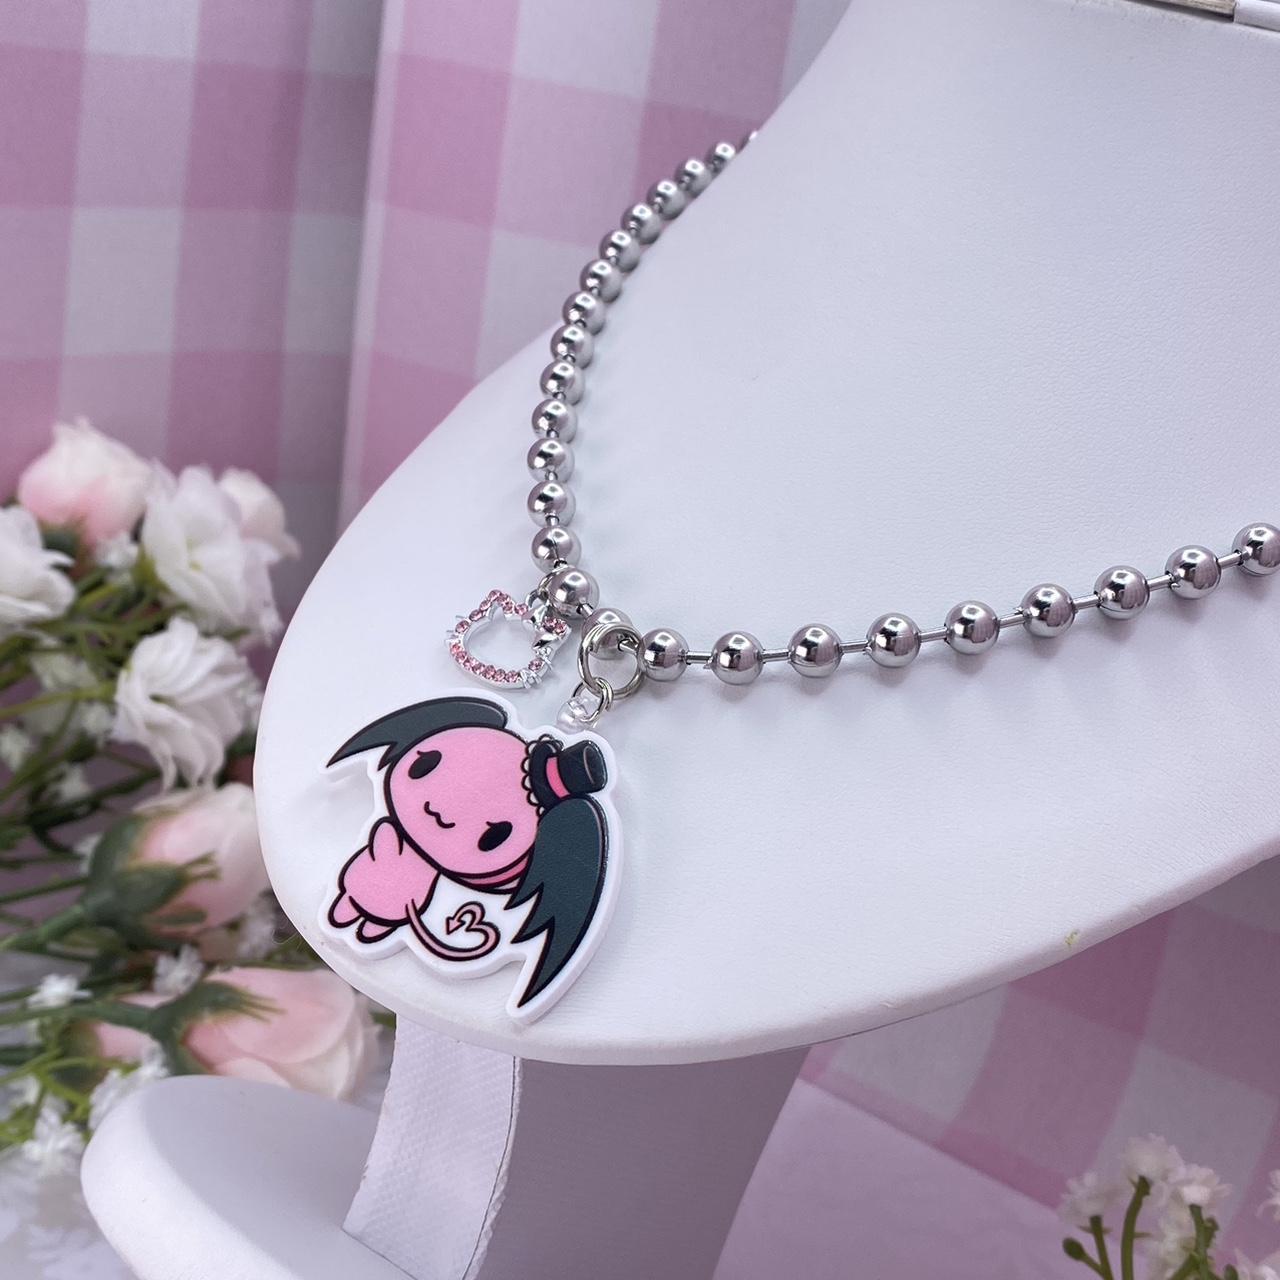 Necklace Bff Necklace For 2 Cute Necklaces Aesthetic Pendant Accessories  Kawaii Friendship Bestie Best Friend Gift For Teen Girls: Clothing, Shoes &  Jewelry - Amazon.com